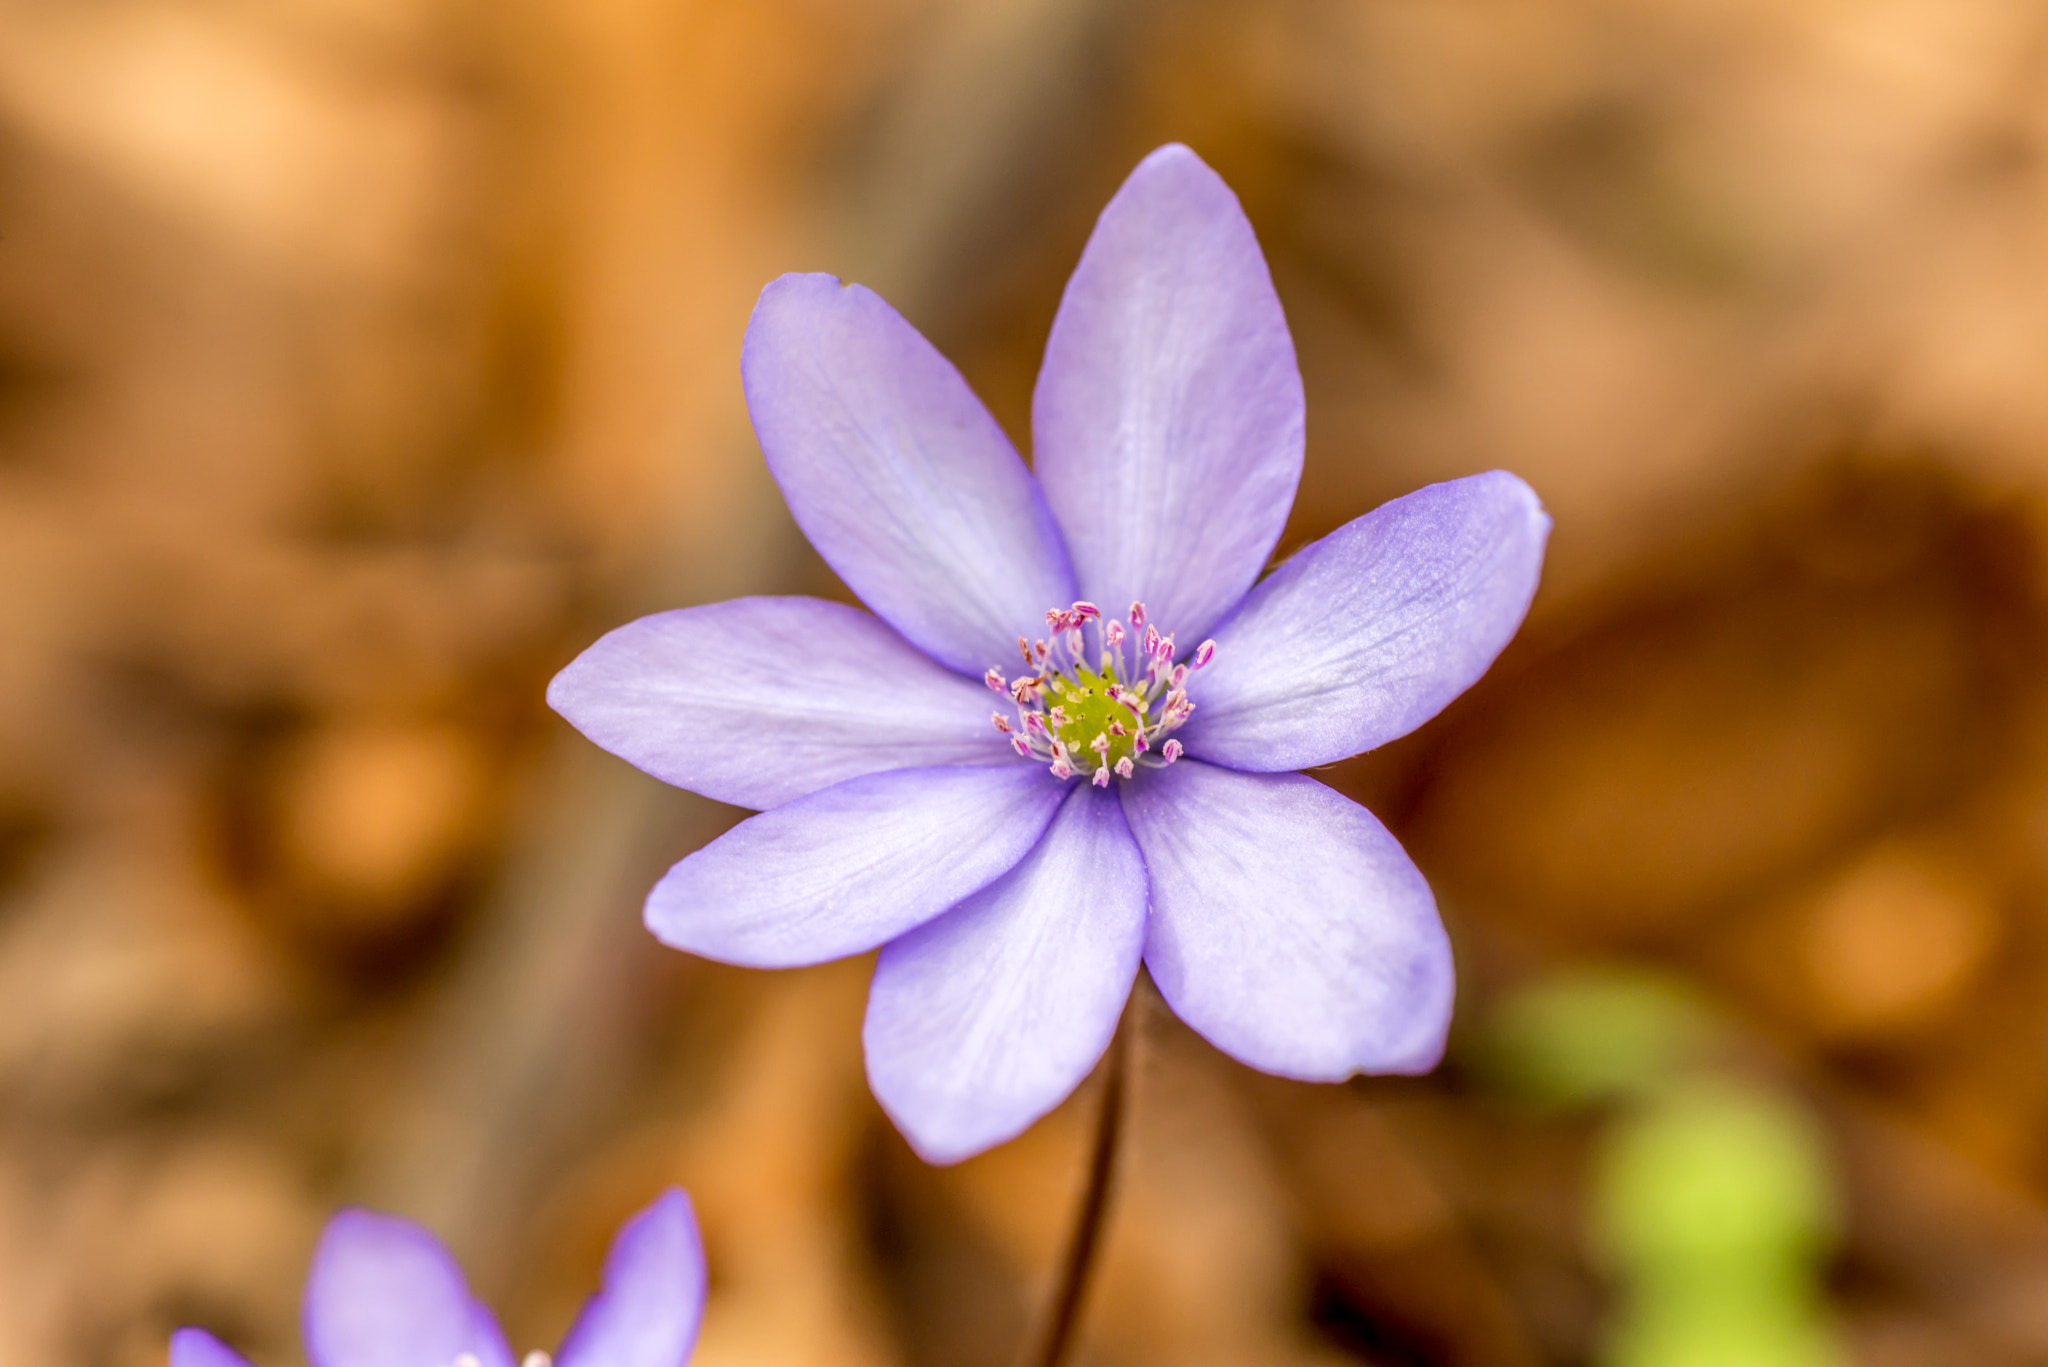 AF Micro-Nikkor 105mm f/2.8 sample photo. Forest violet flower at early spring in forest photography